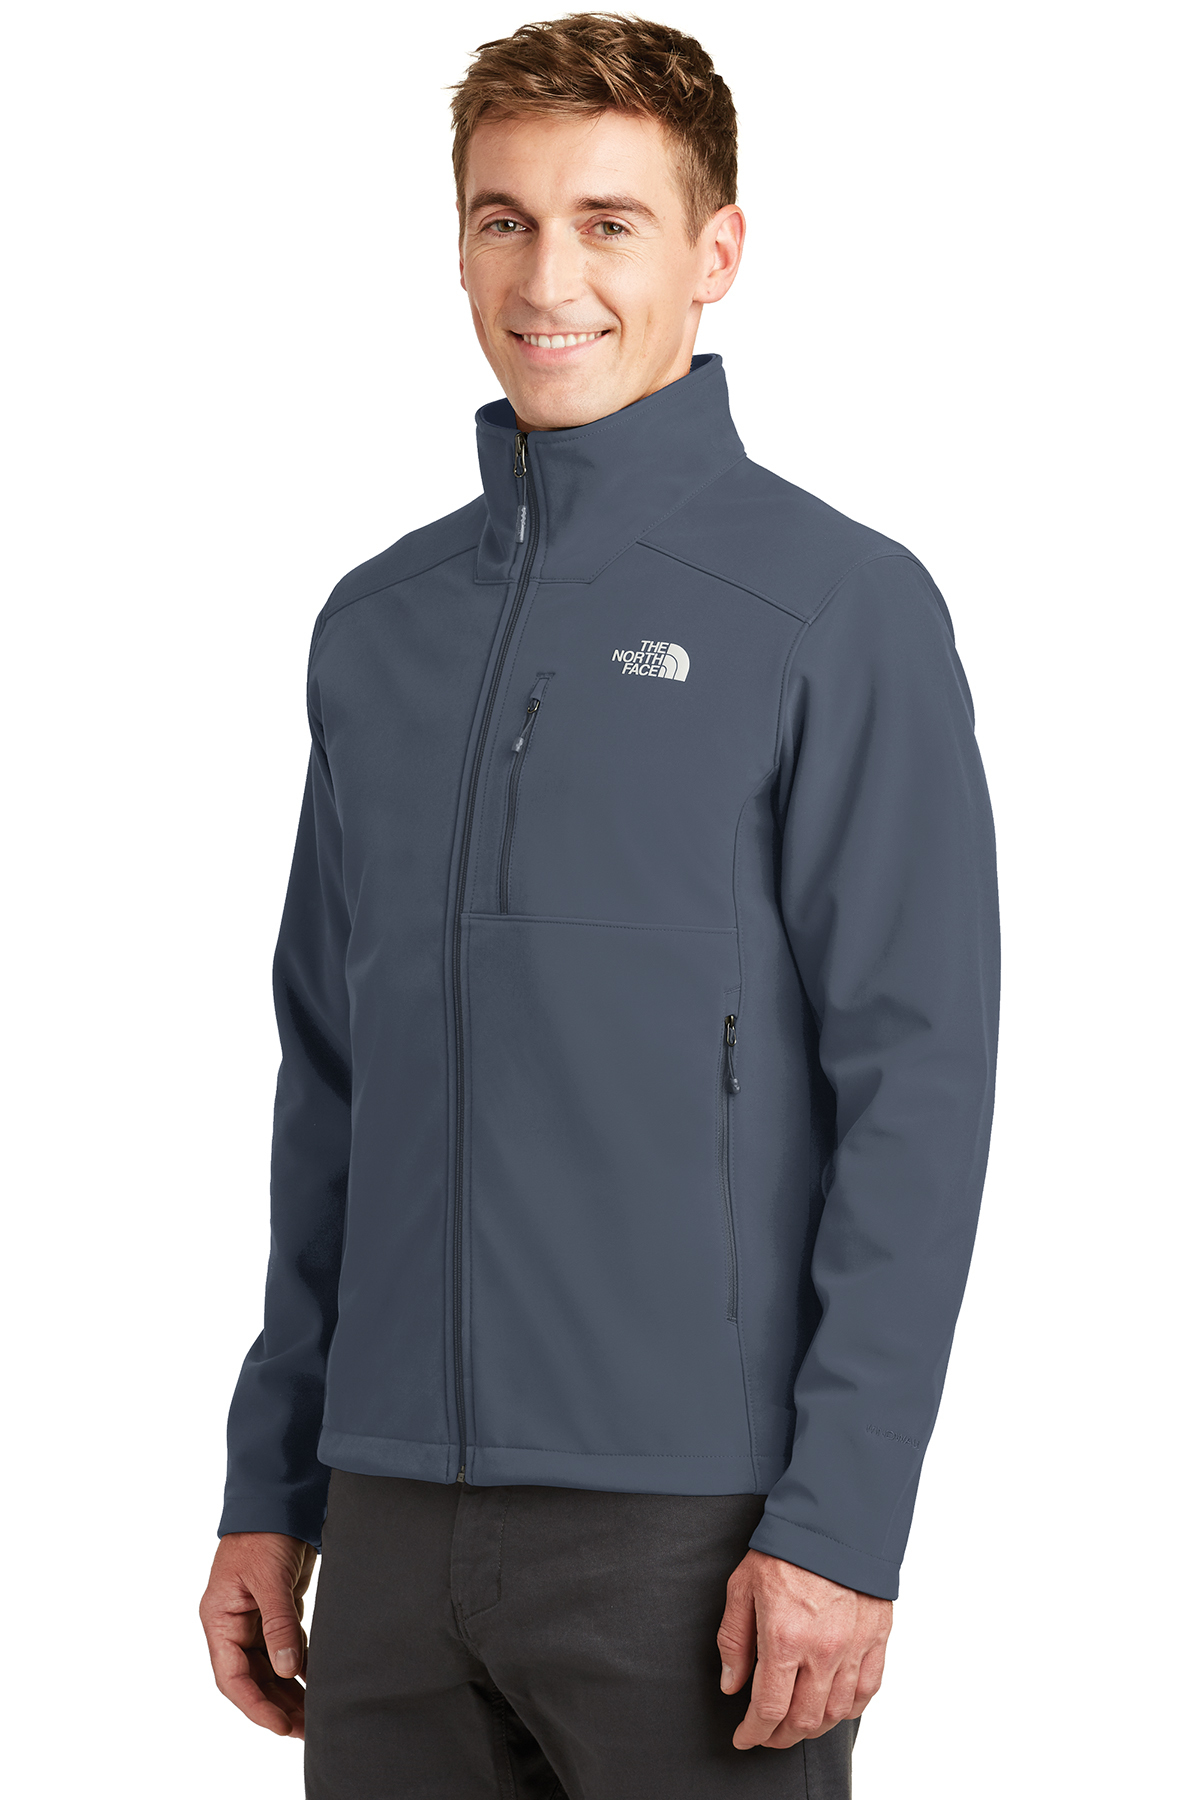 Samenstelling rommel details The North Face<SUP>®</SUP> Apex Barrier Soft Shell Jacket | Product | SanMar